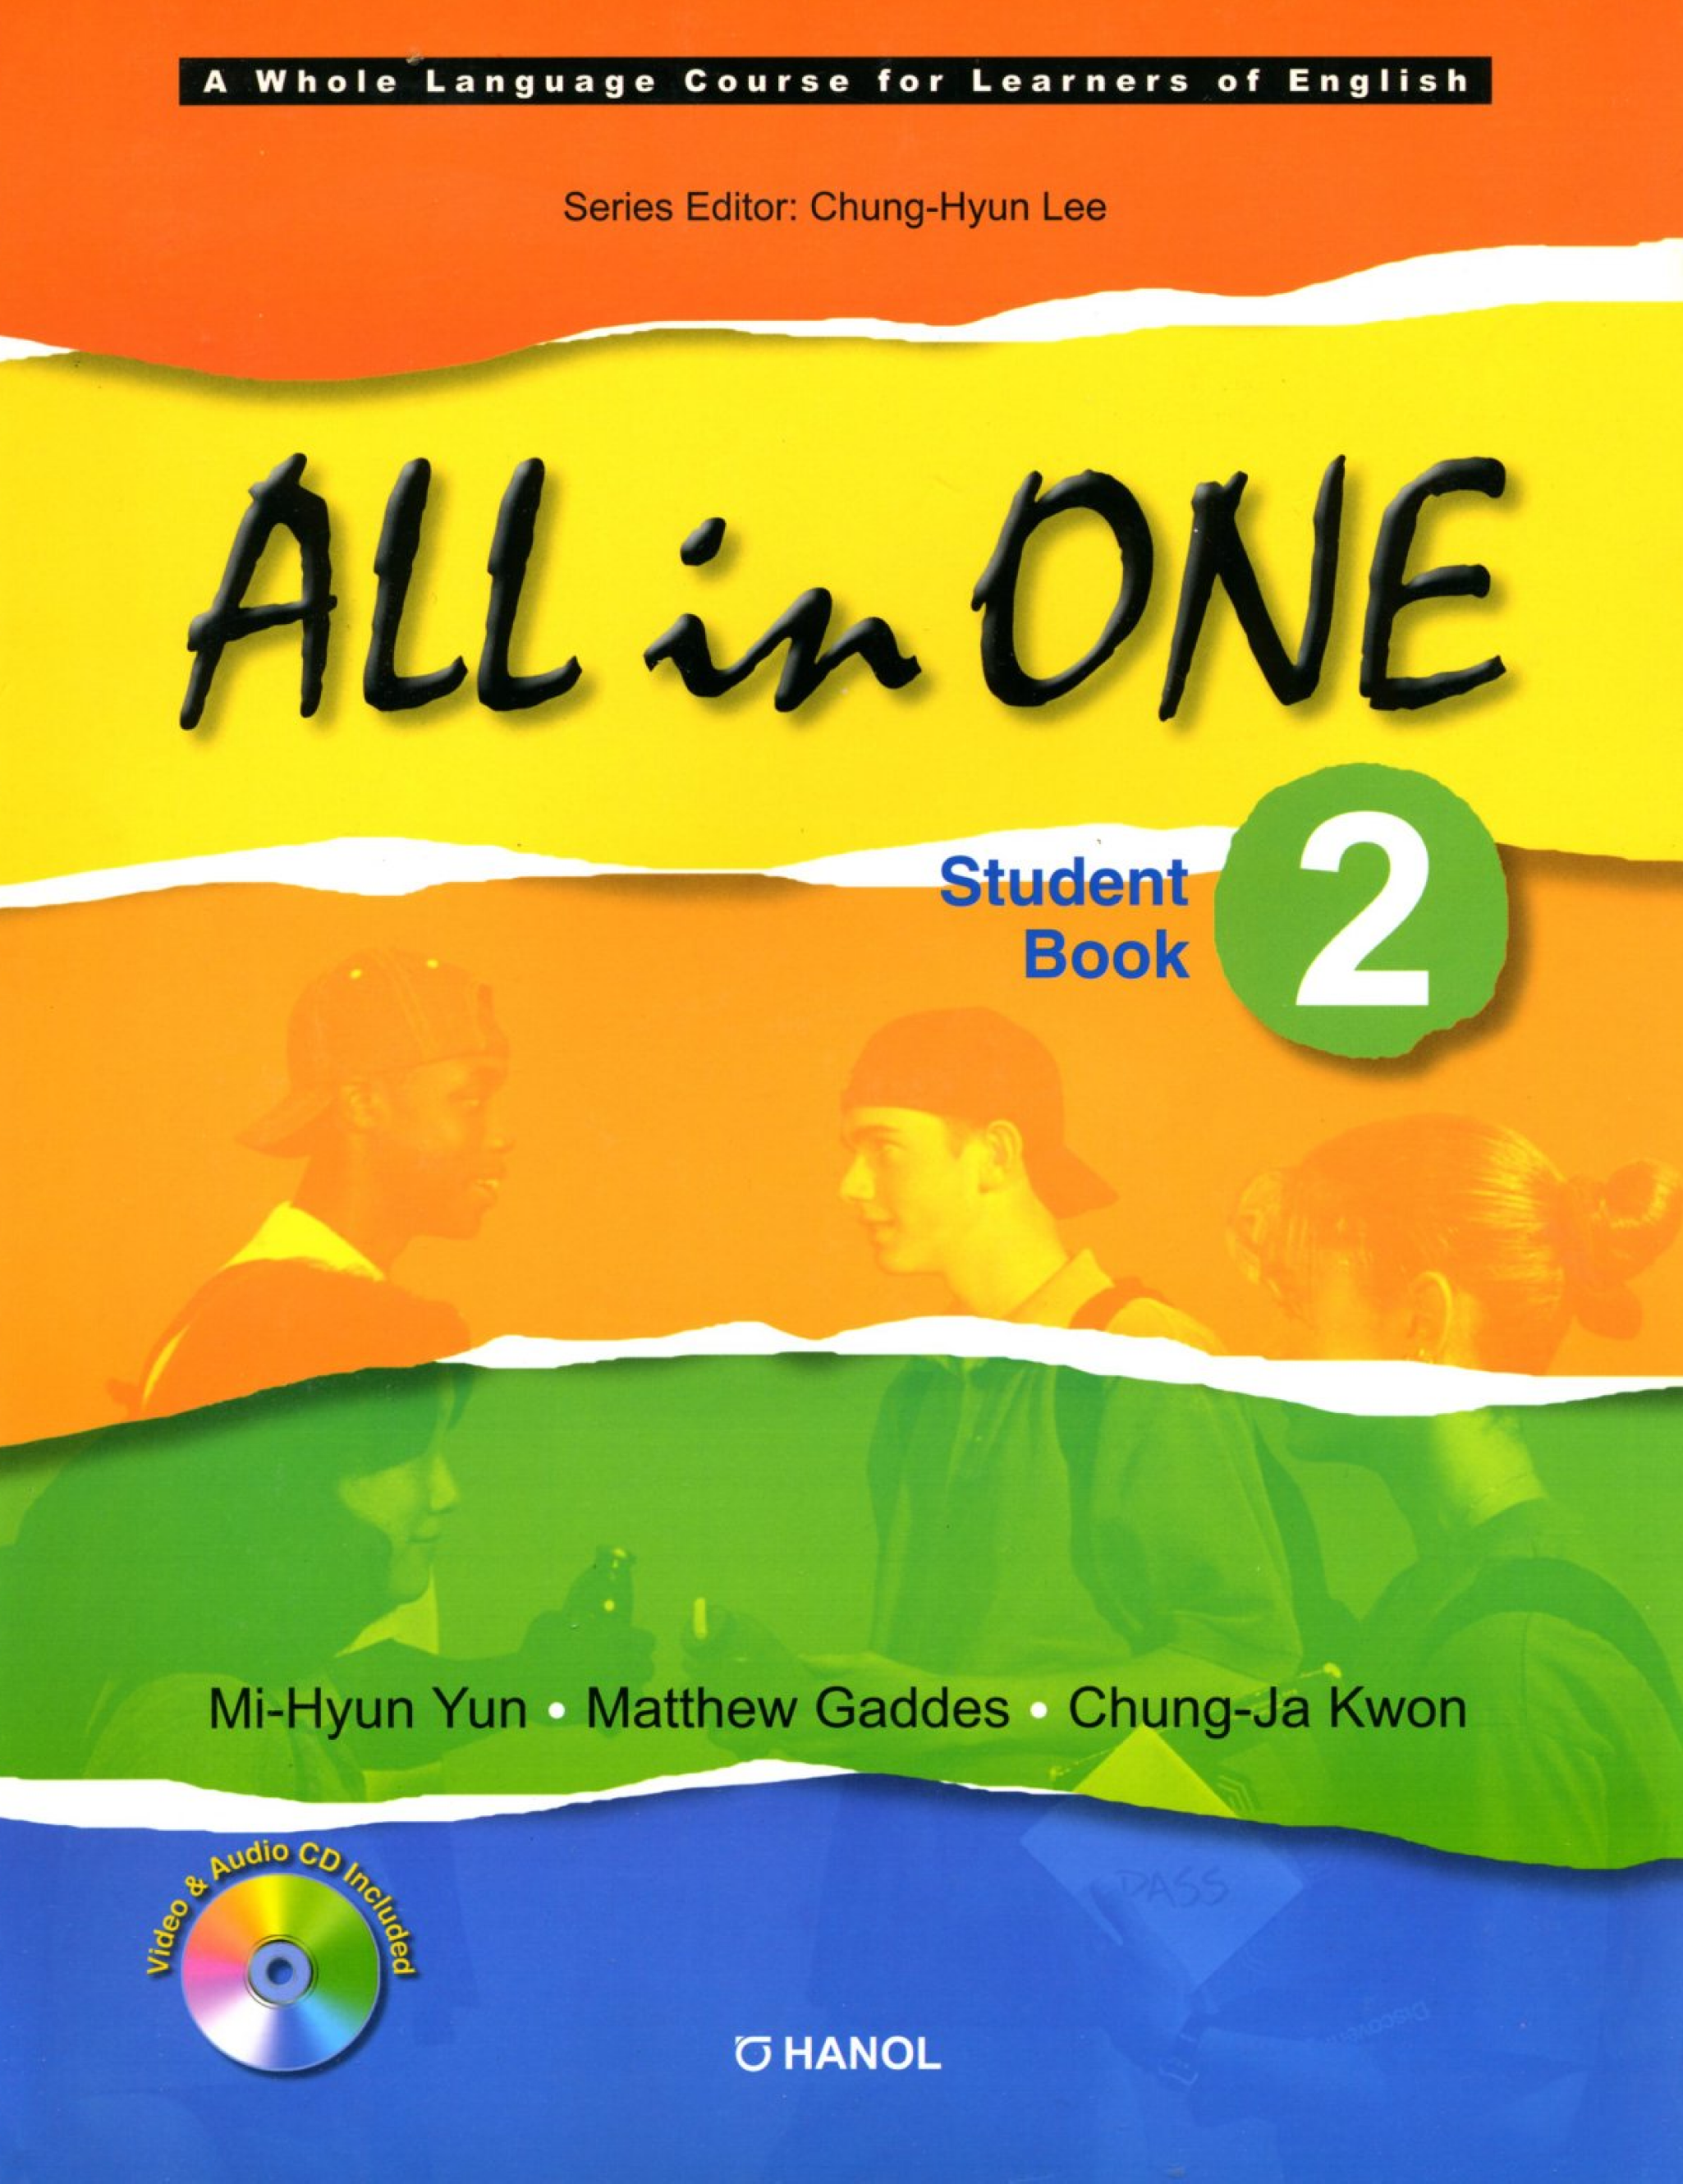 All in one Student Book 2